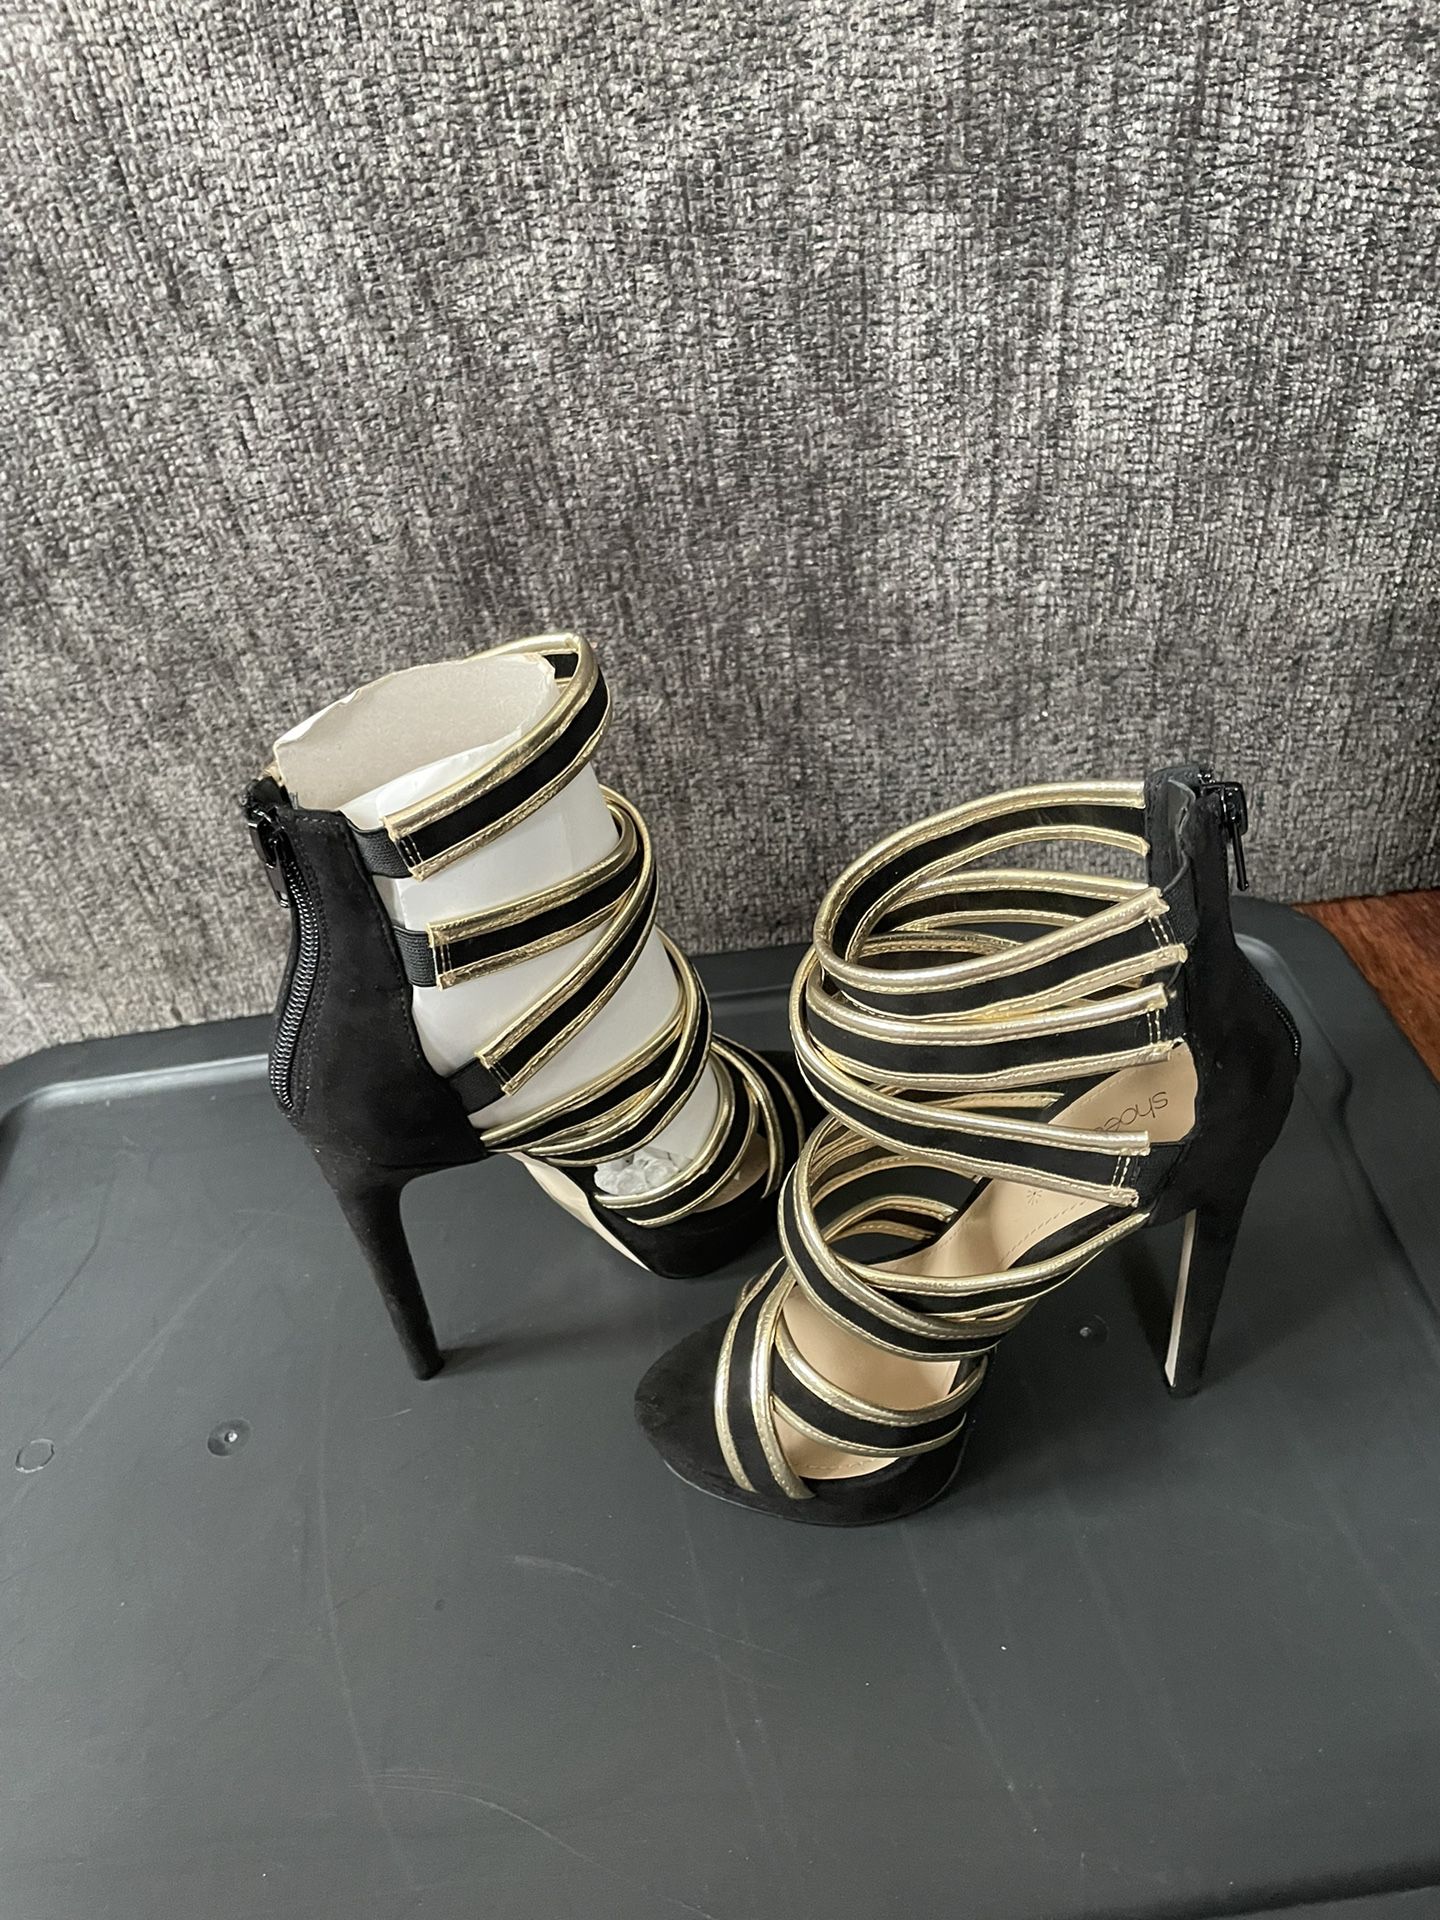 Black And Gold Heels